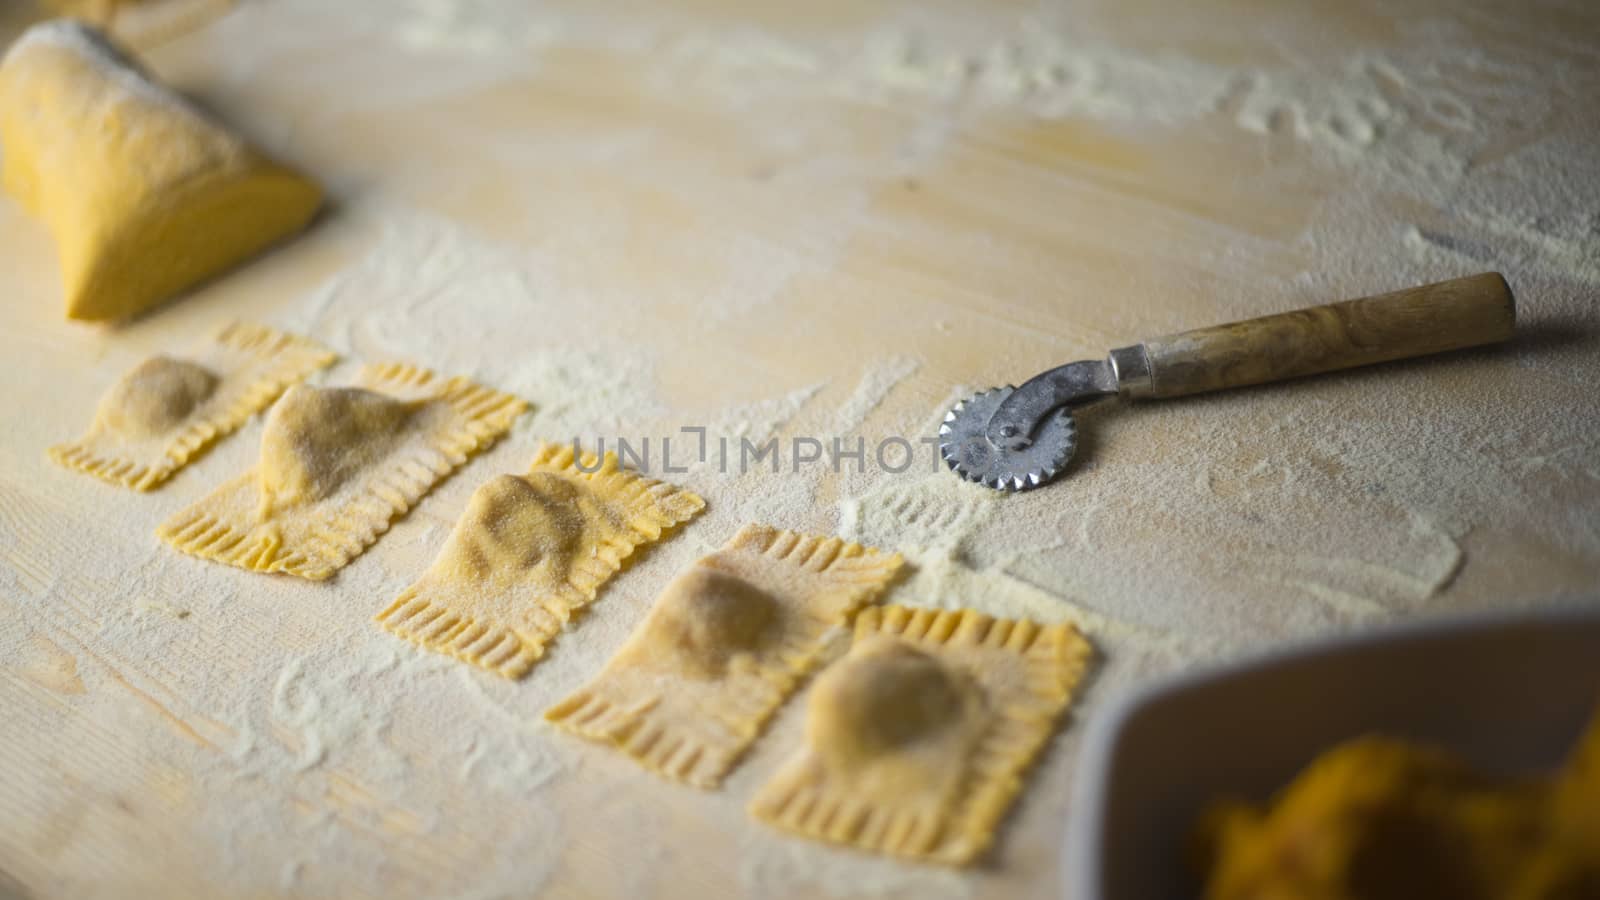 Closeup of pumpkin ravioli vegan, traditional Italian pasta, homemade pasta just made, with the dough mass durum wheat flour, the cutting wheel and wheat flour scattered on the light wooden table by robbyfontanesi